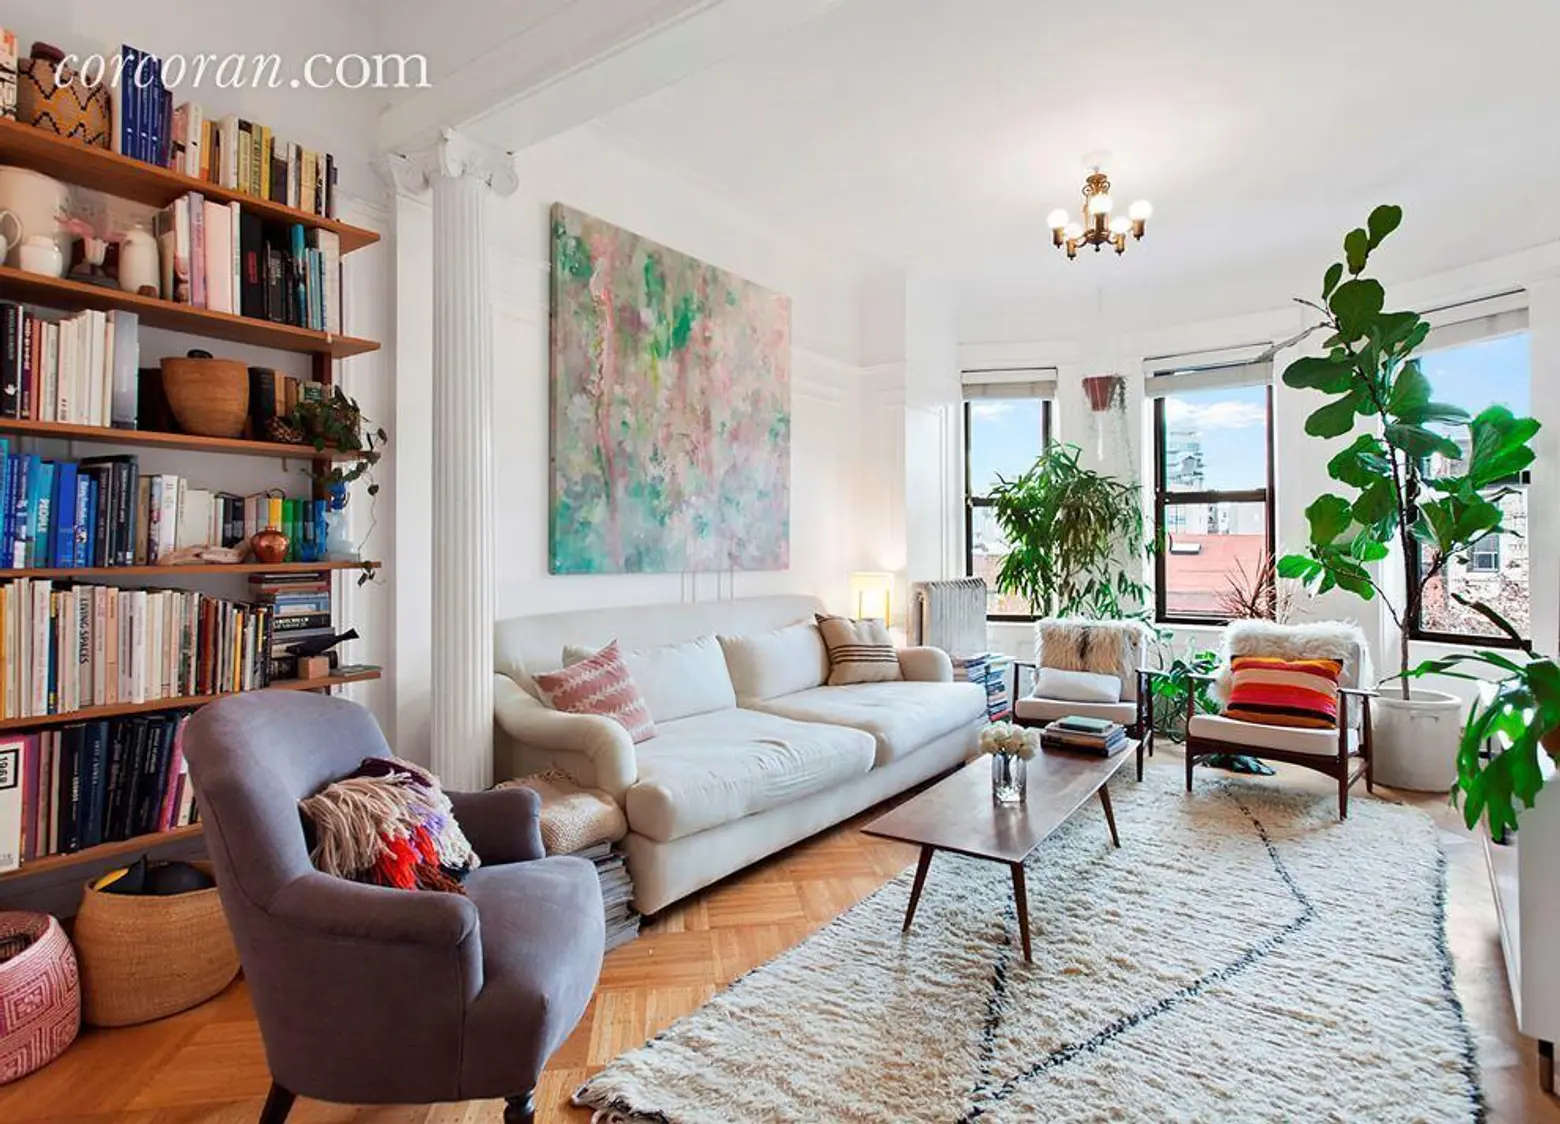 Bright, Modern Clinton Hill Three-Bedroom on Biggie’s Old Block Offers Lots of Options for $950K